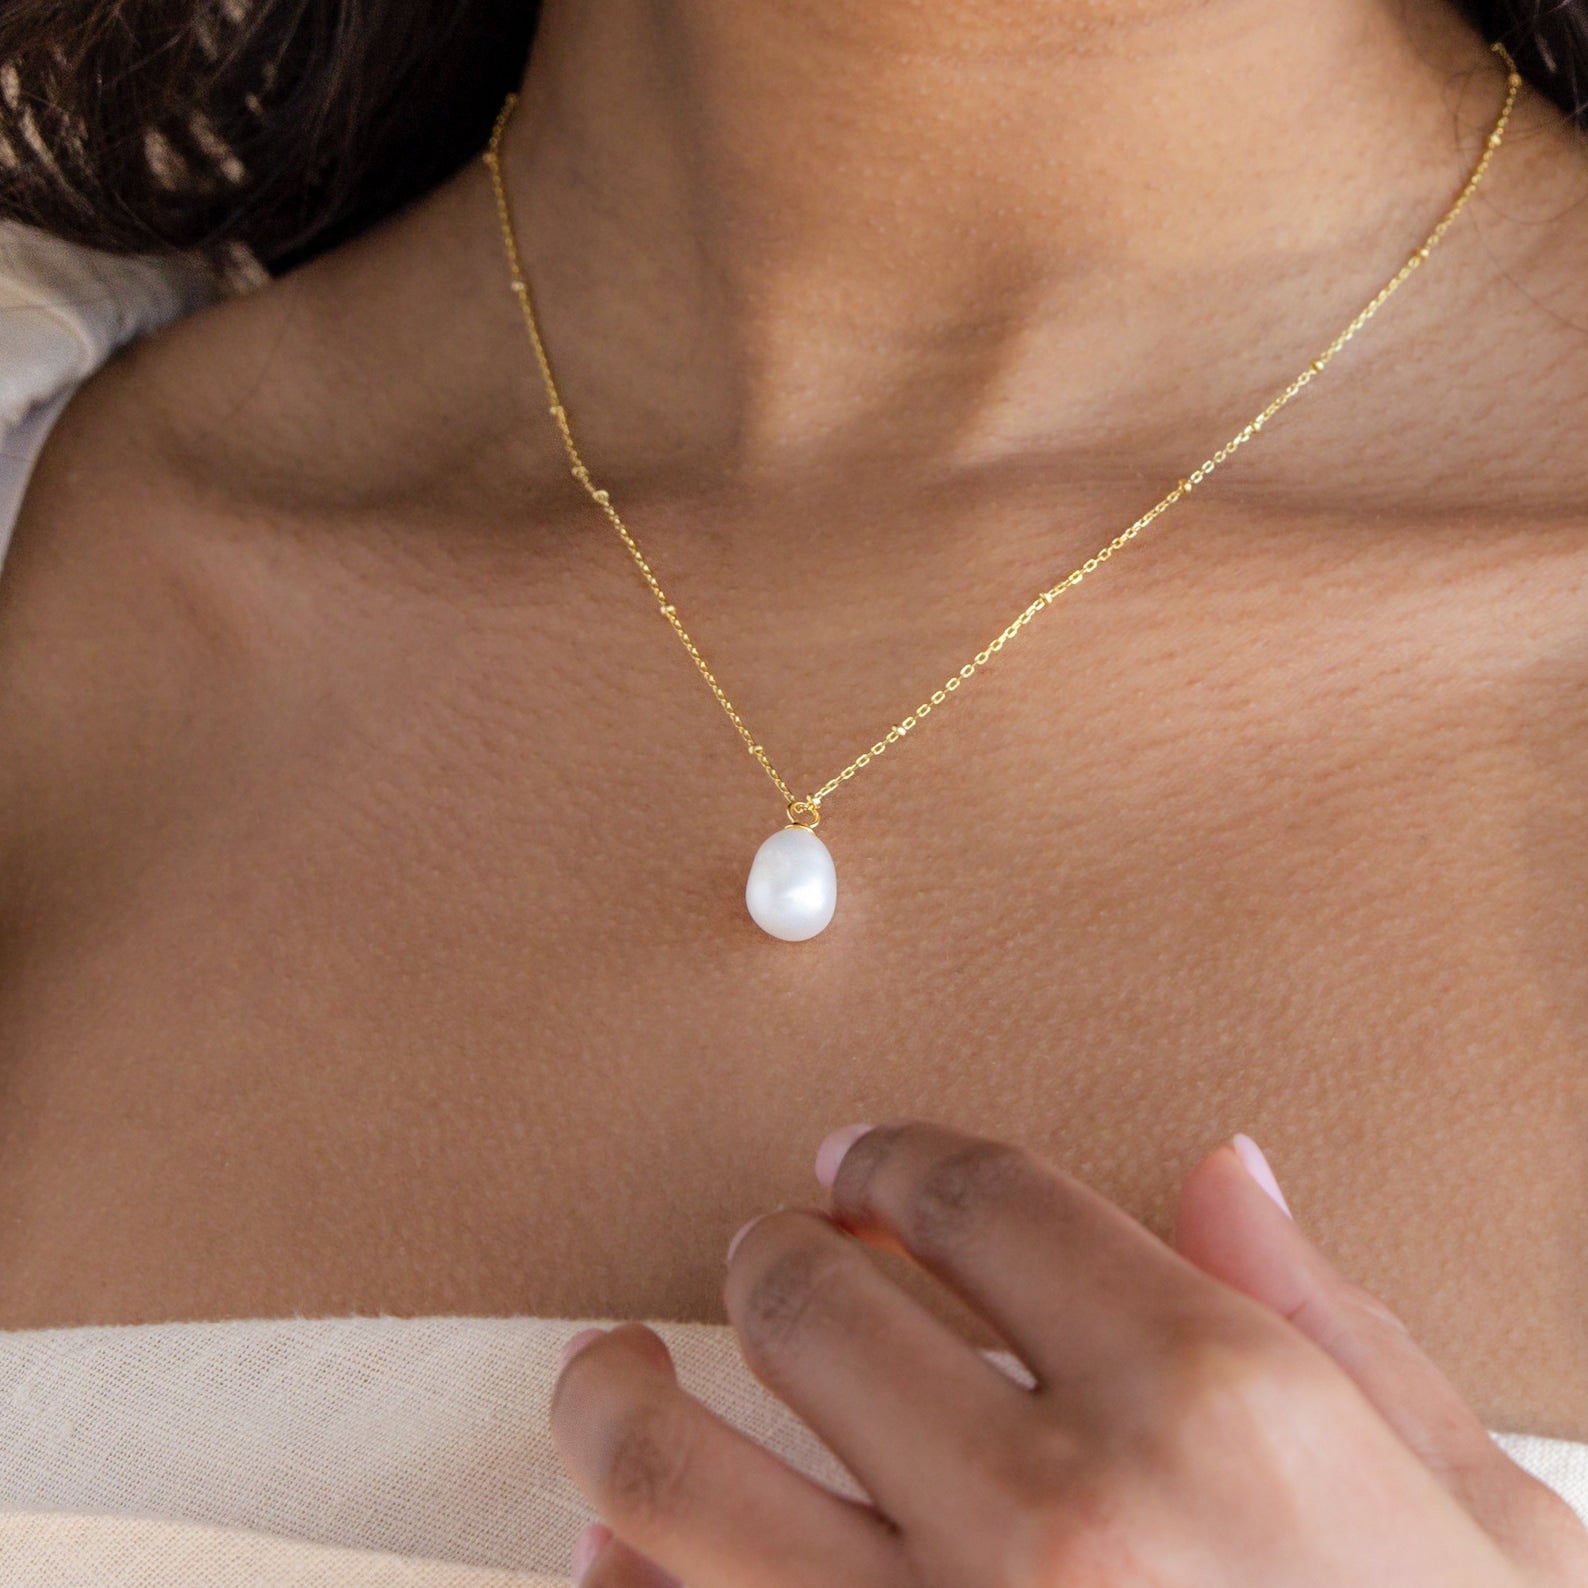 14K Gold Pearl Necklace, Minimalist Pearl Pendant, Birthday Gift for Women,  Valentines Gift, Bridesmaid Gift, Jewelry for Woman